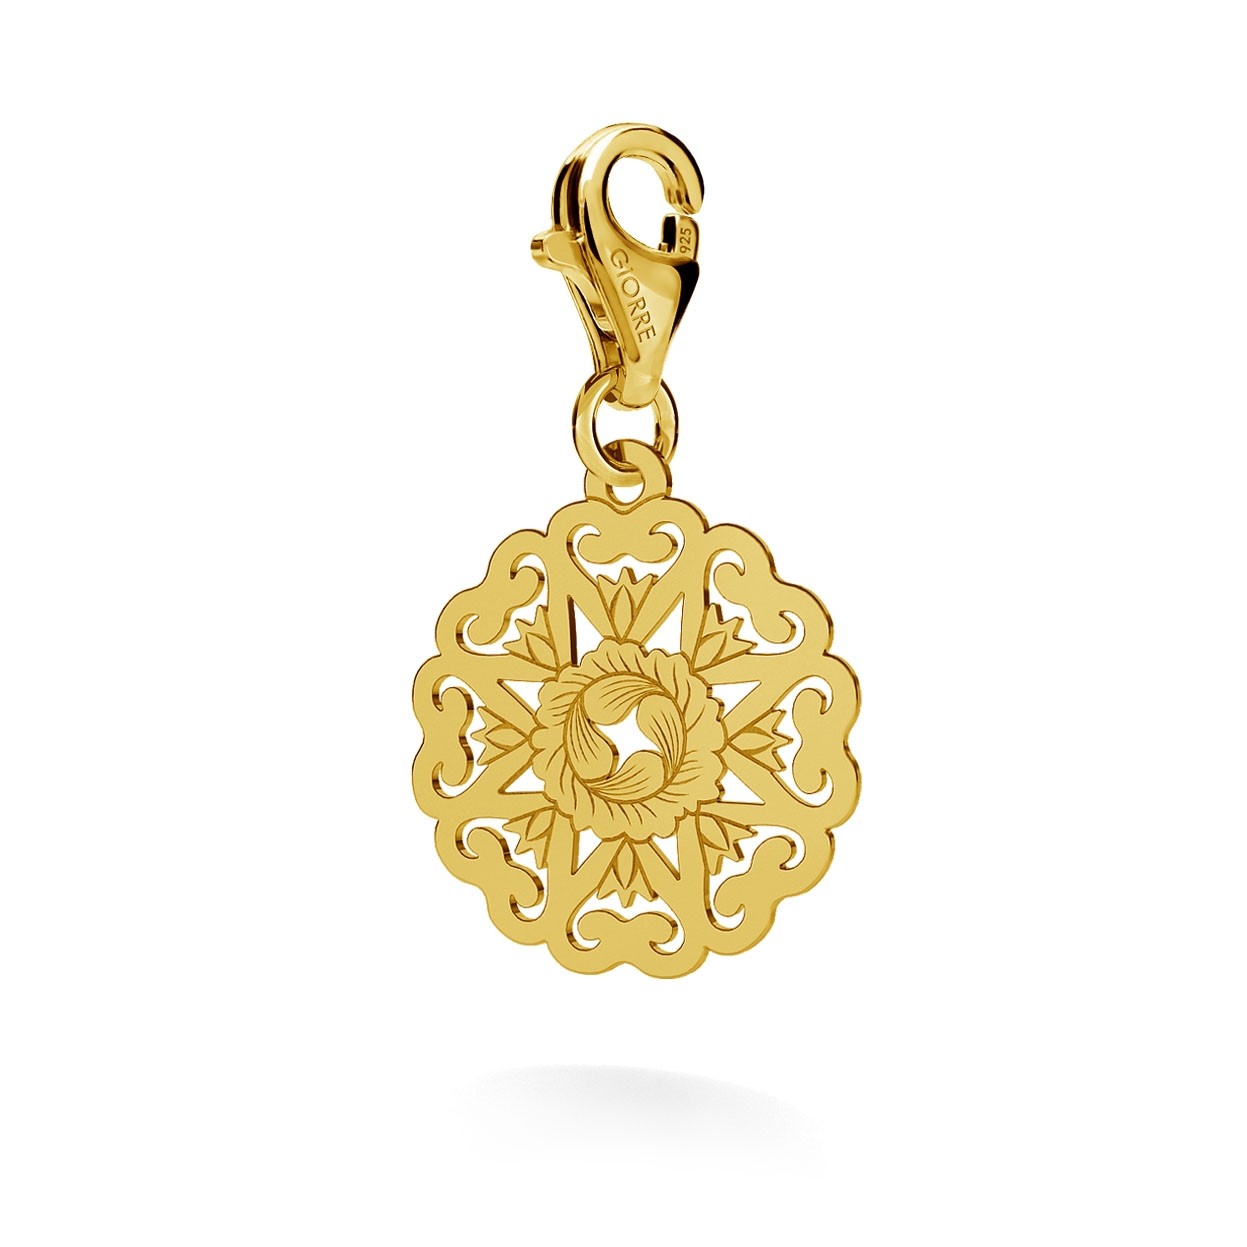 CHARM 57, BIG OPENWORK, SILVER 925, RHODIUM OR GOLD PLATED